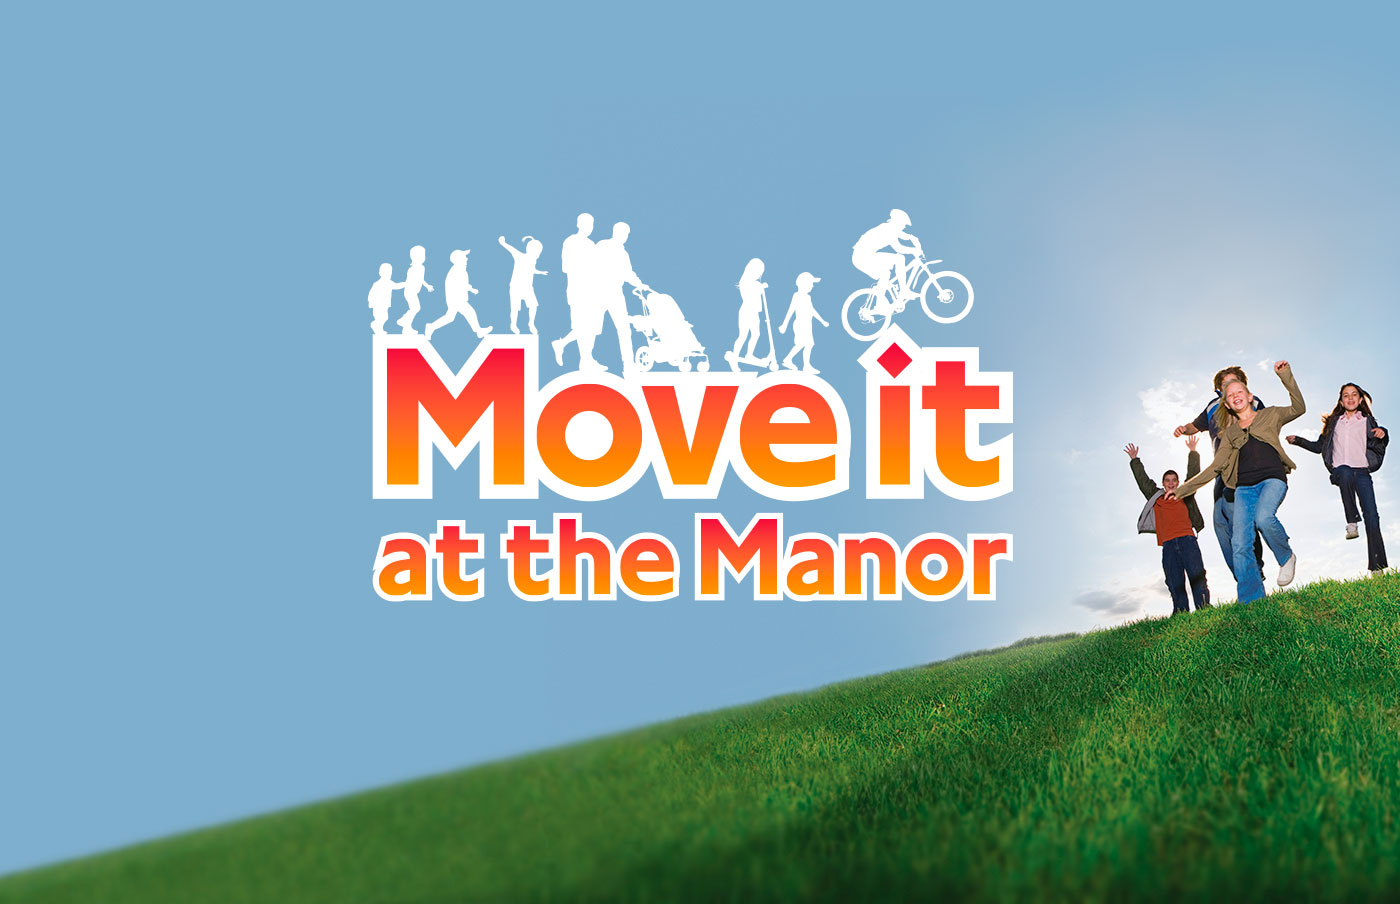 Tfl and Sutton Council – Move it at the Manor event branding and materials